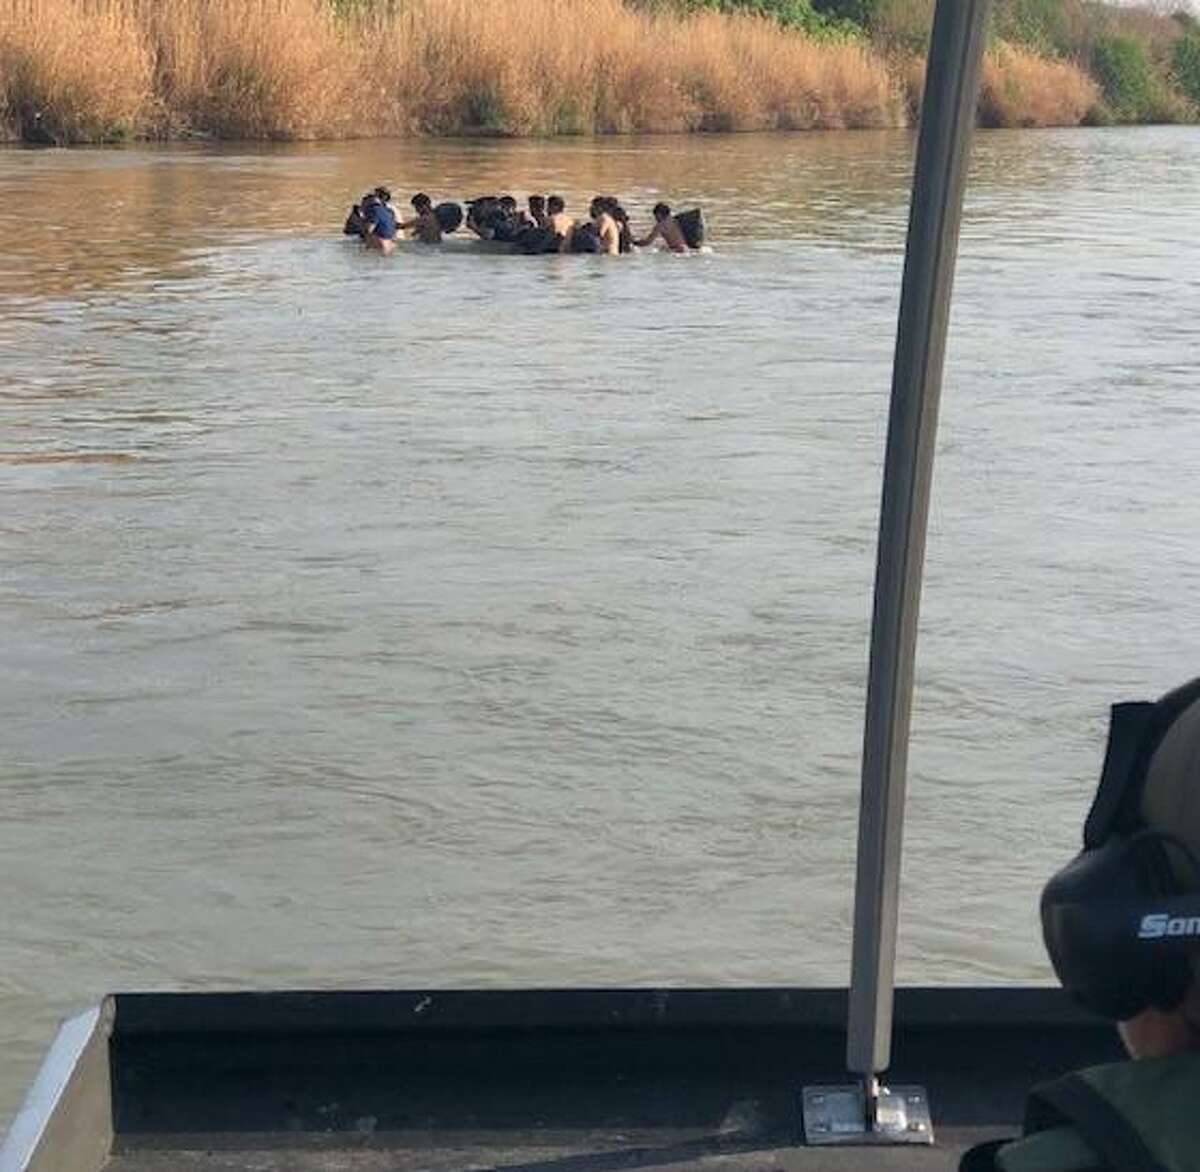 U.S. Border Patrol agents assigned to the marine unit foiled the illegal crossing of 29 individuals at the Rio Grande.